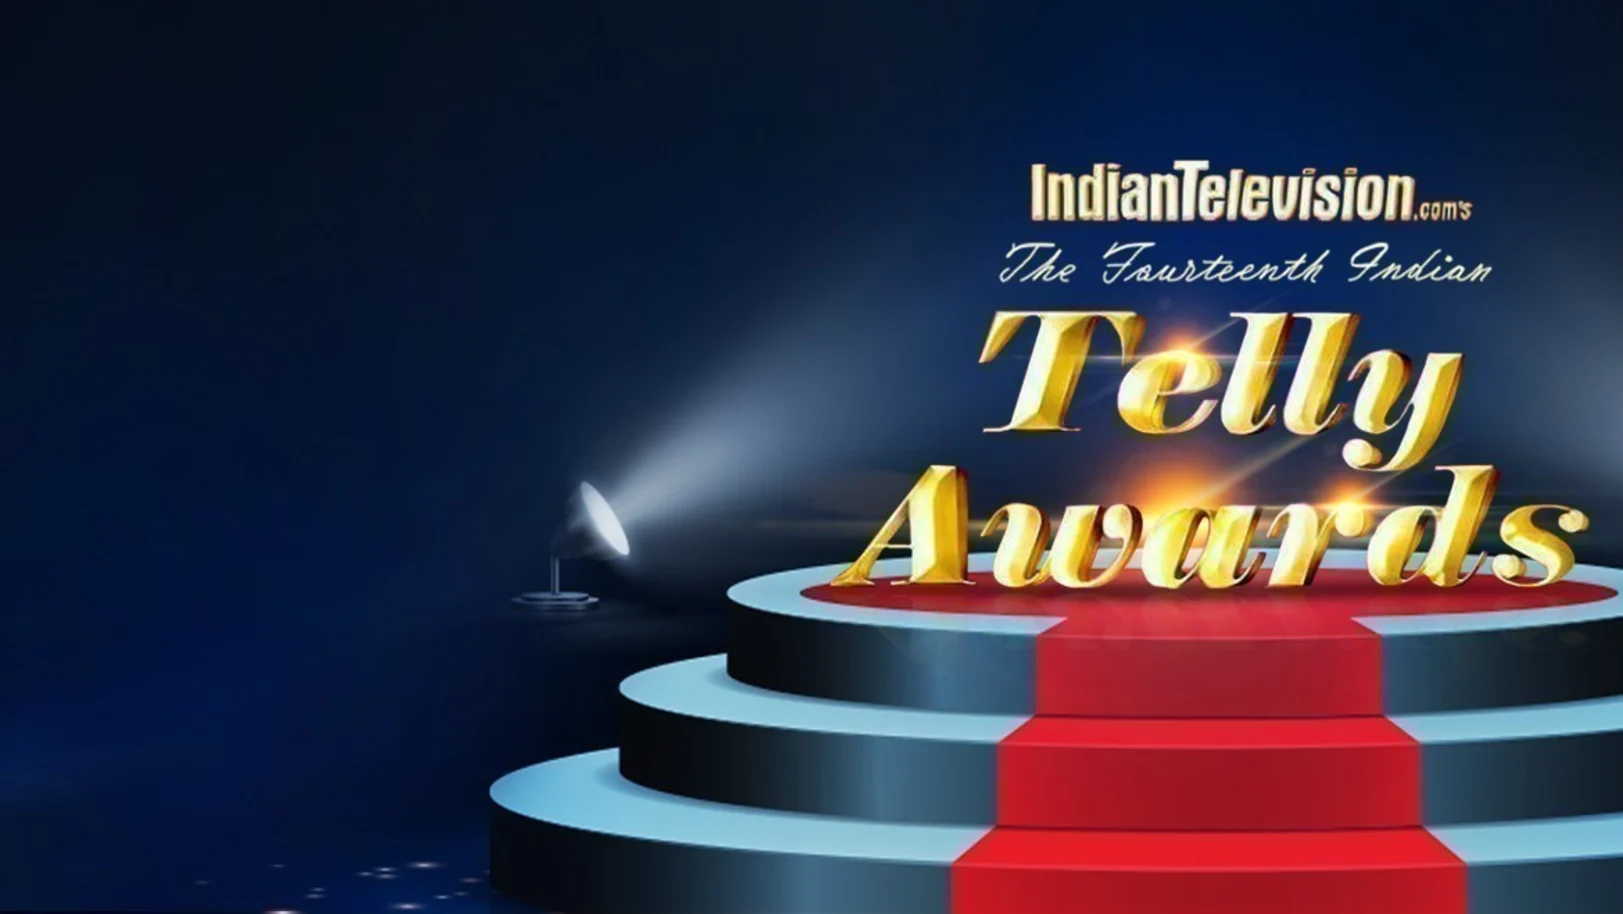 Indian Telly Awards 2015 TV Show